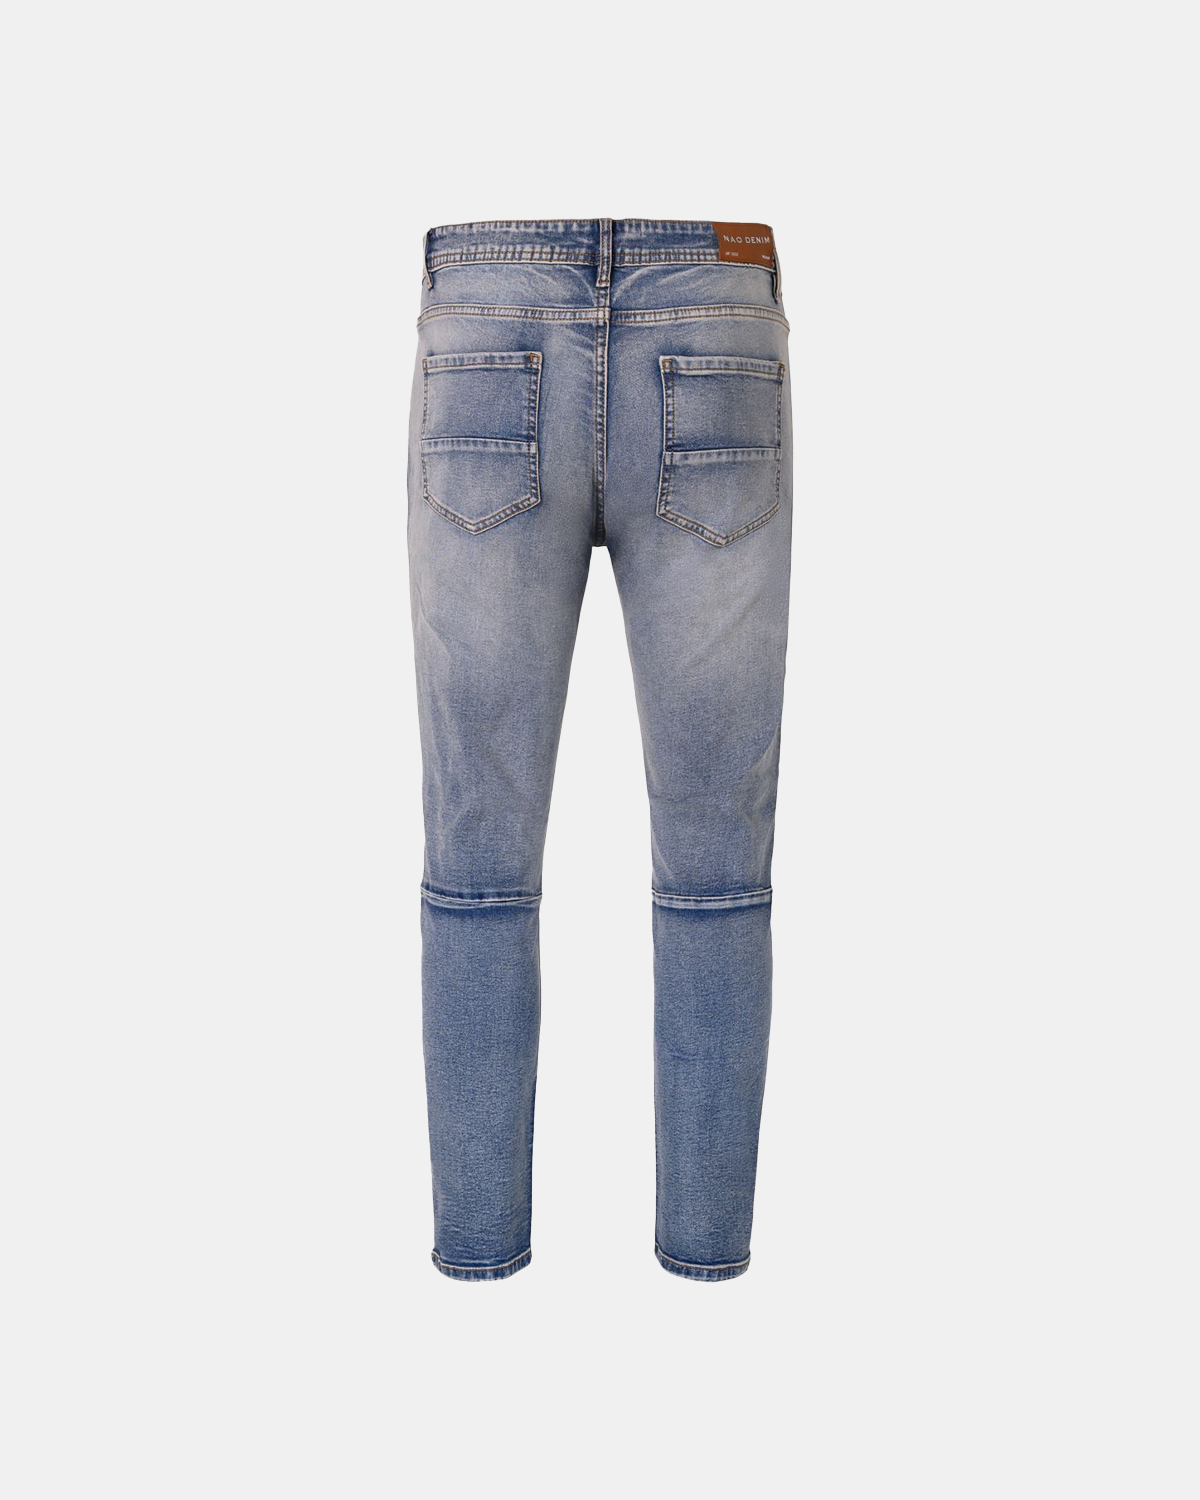  NZ49 - DESTROYED JEANS - DIRTY BLUE 